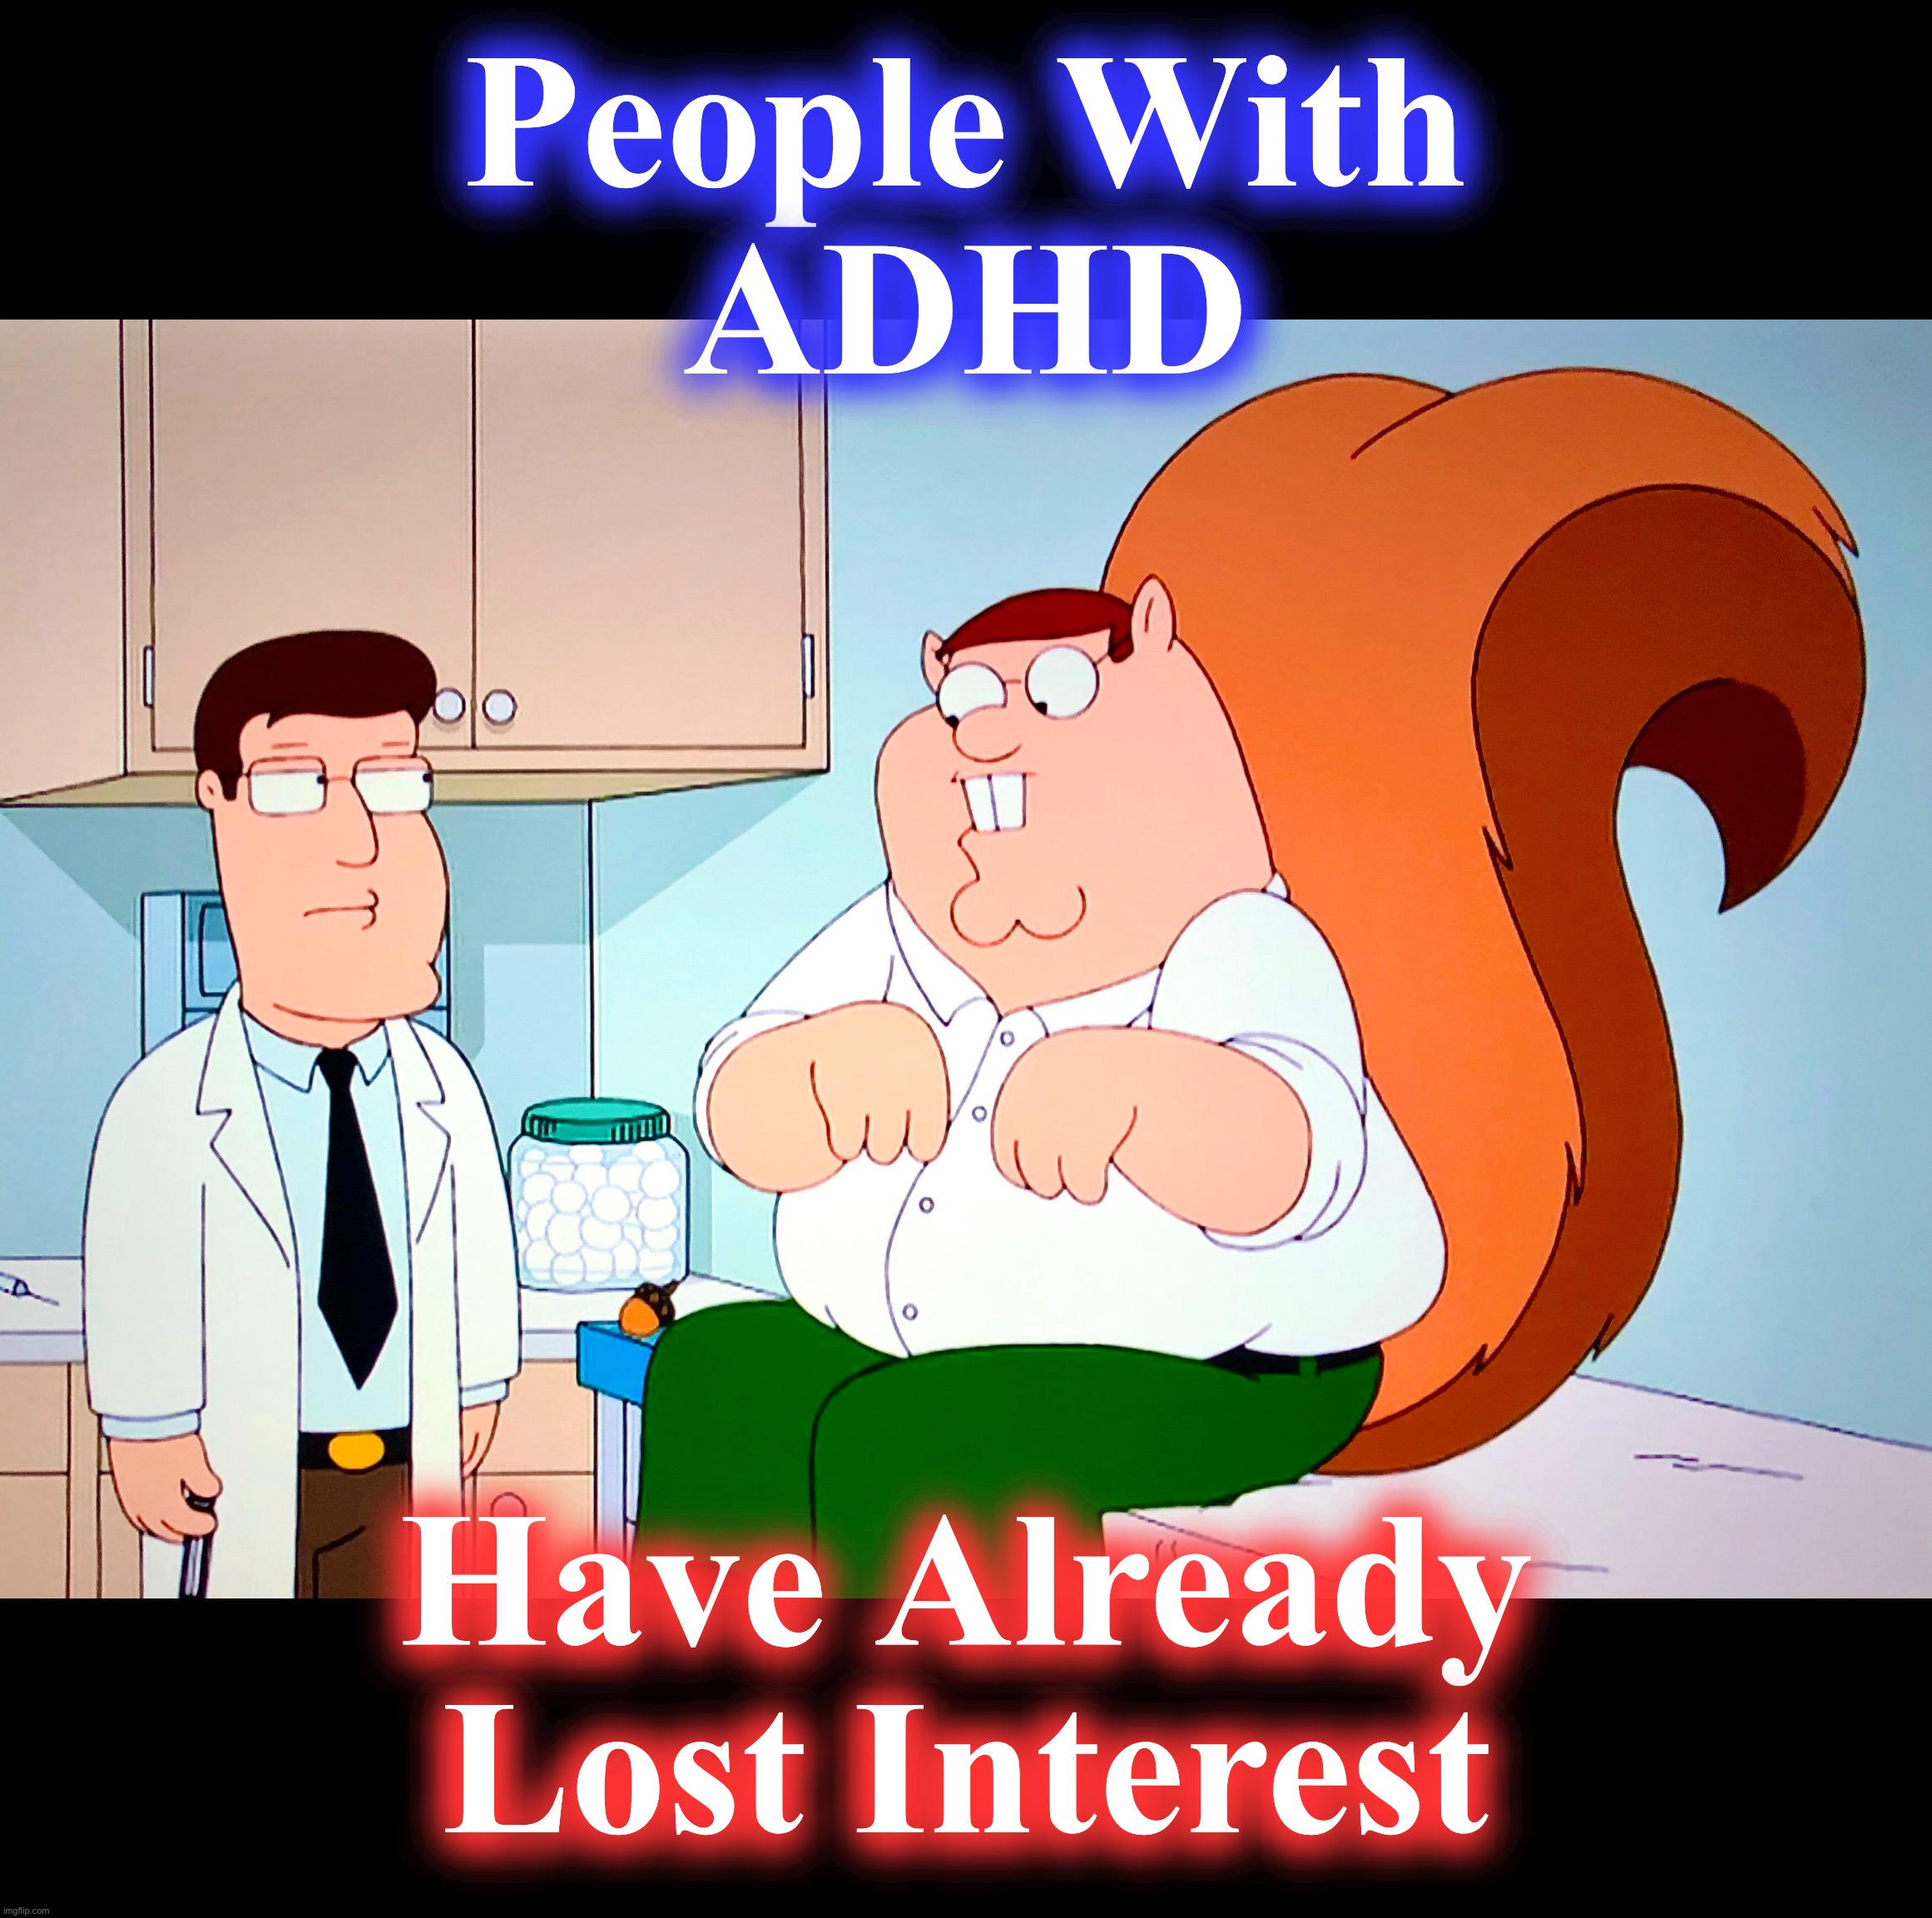 I’m typing too slow | People With
ADHD; Have Already
Lost Interest | image tagged in adhd,memes,attention,squirrel,doctor and patient,meth | made w/ Imgflip meme maker